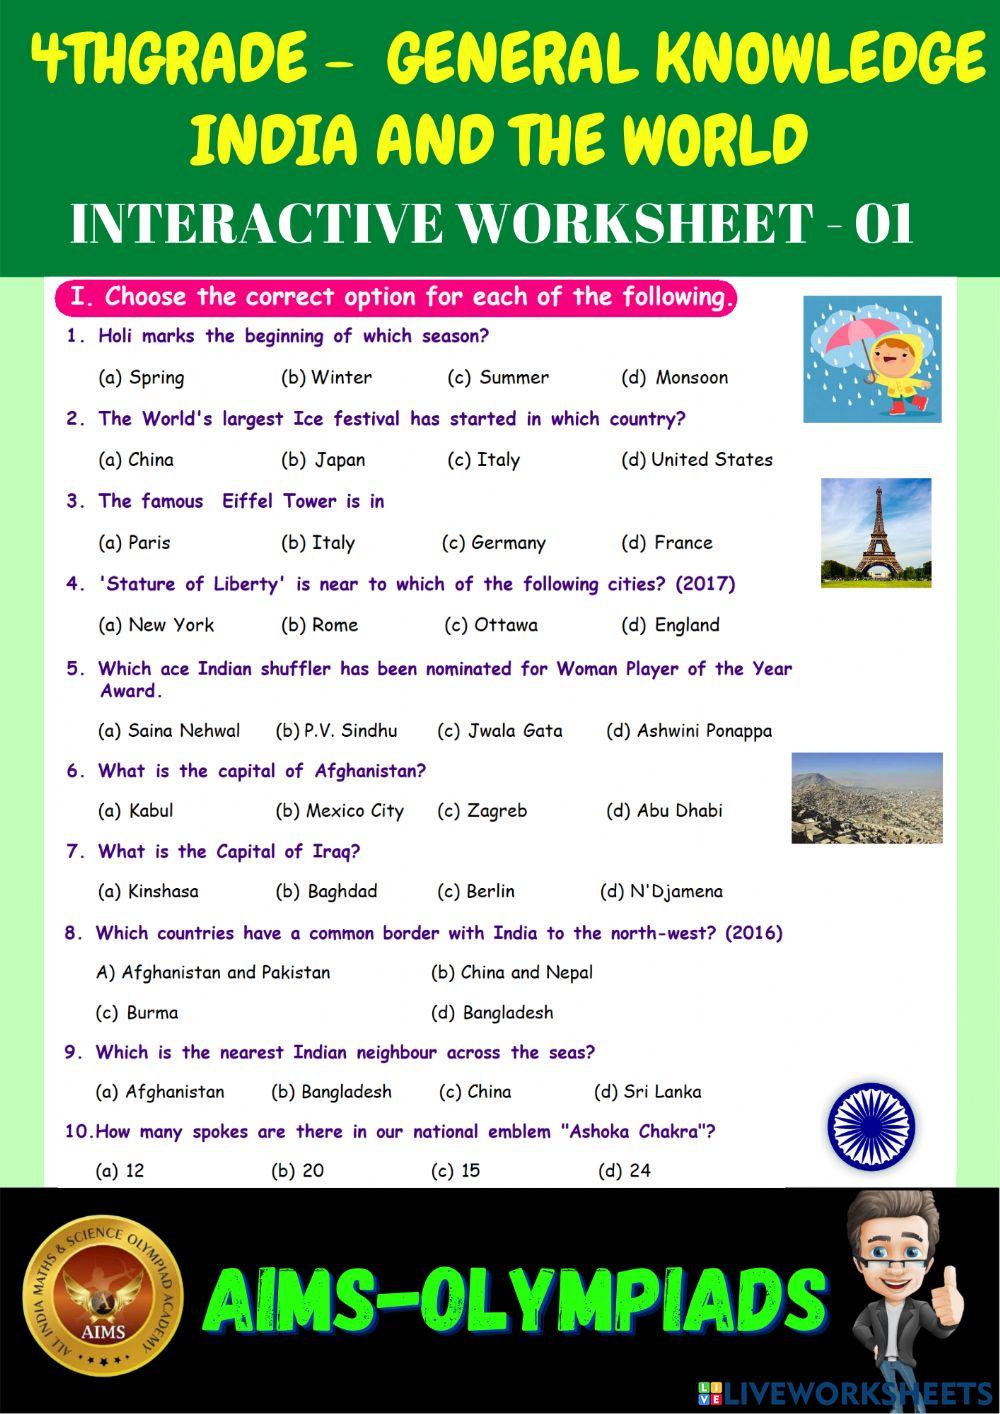 4th-general knowledge-ps01-india and the world